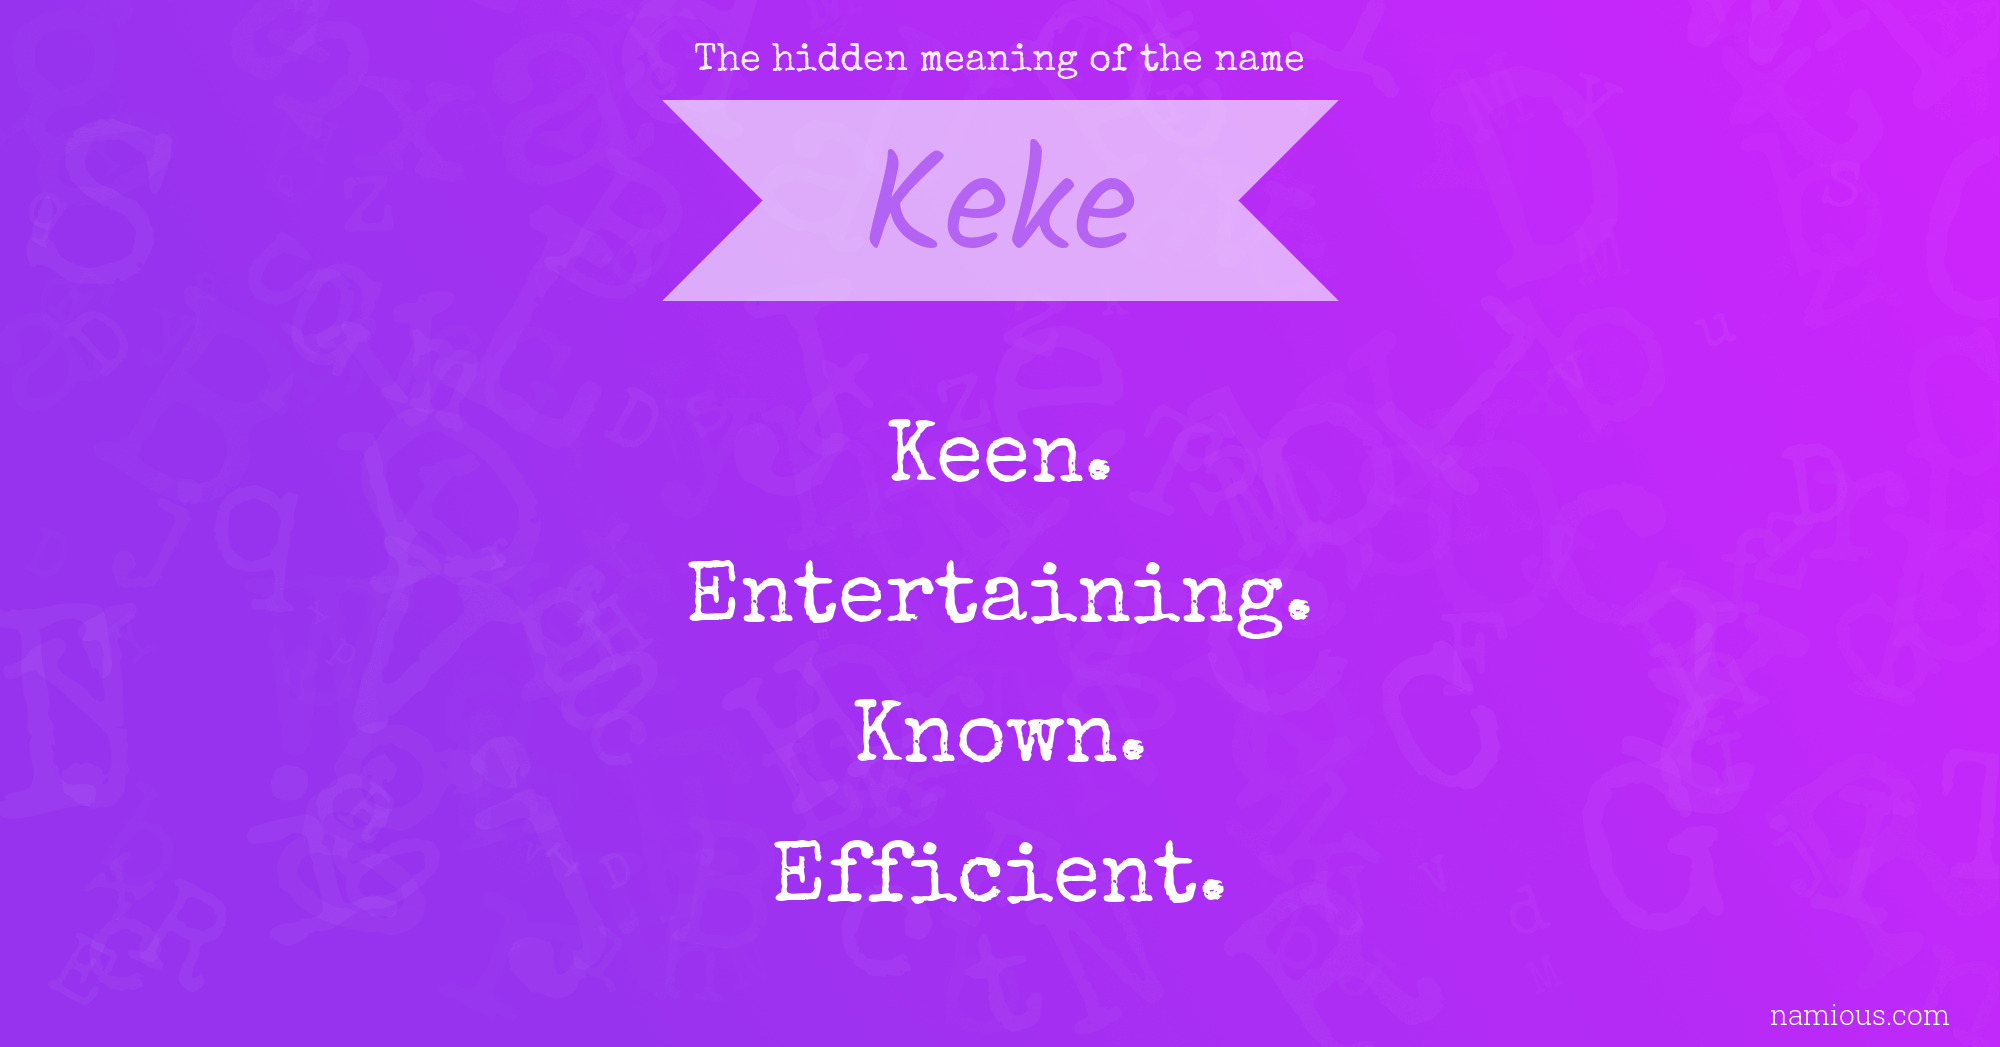 The hidden meaning of the name Keke